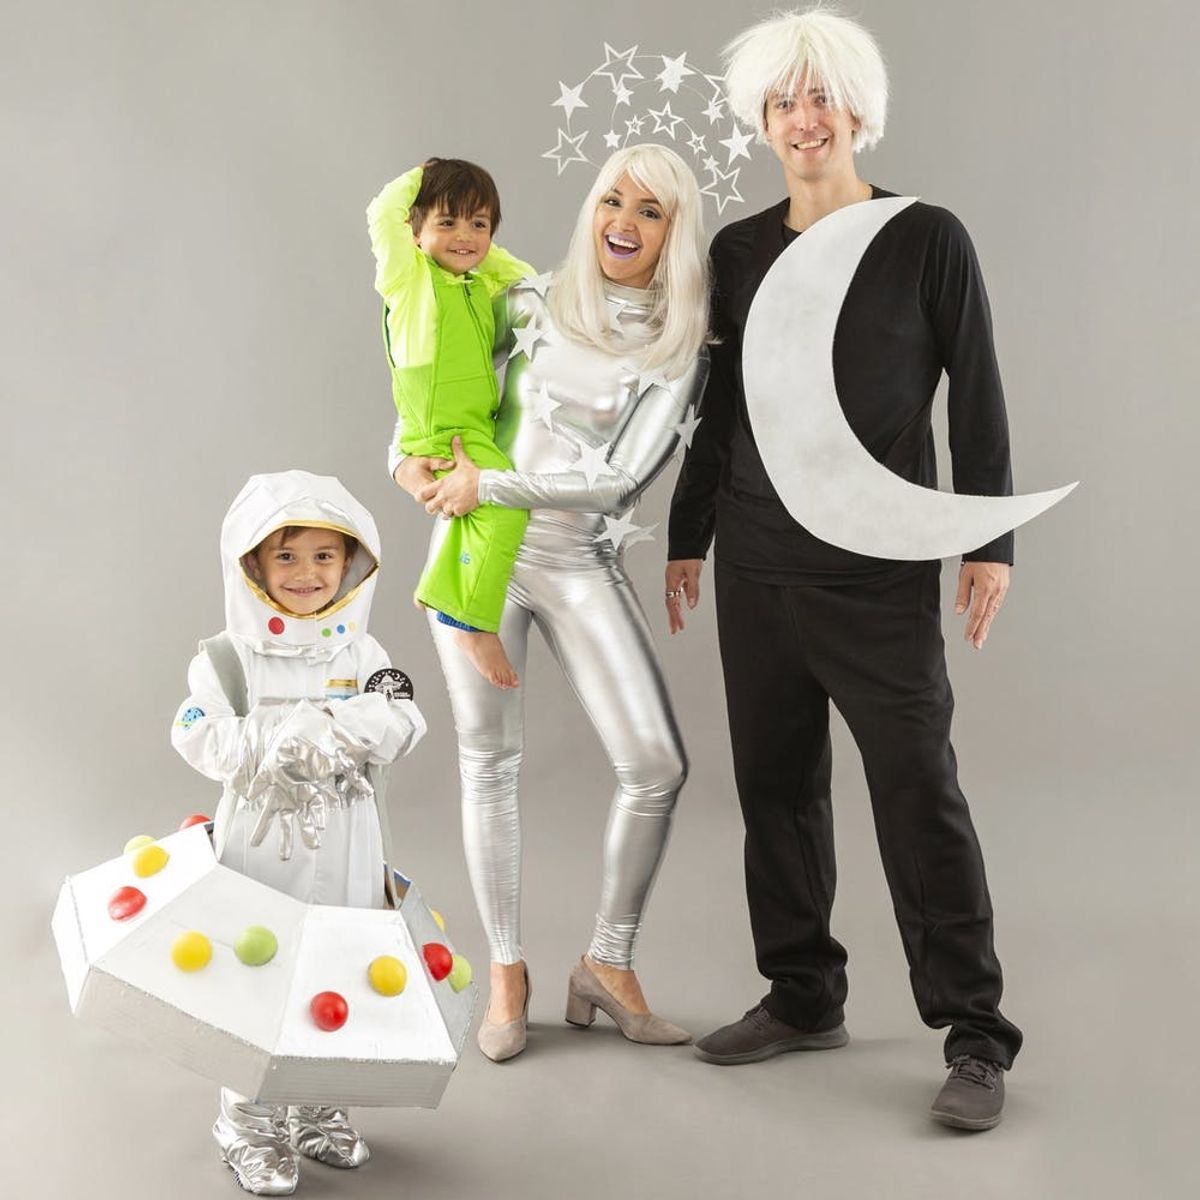 This Space-Inspired Family Halloween Costume Is Out of This World